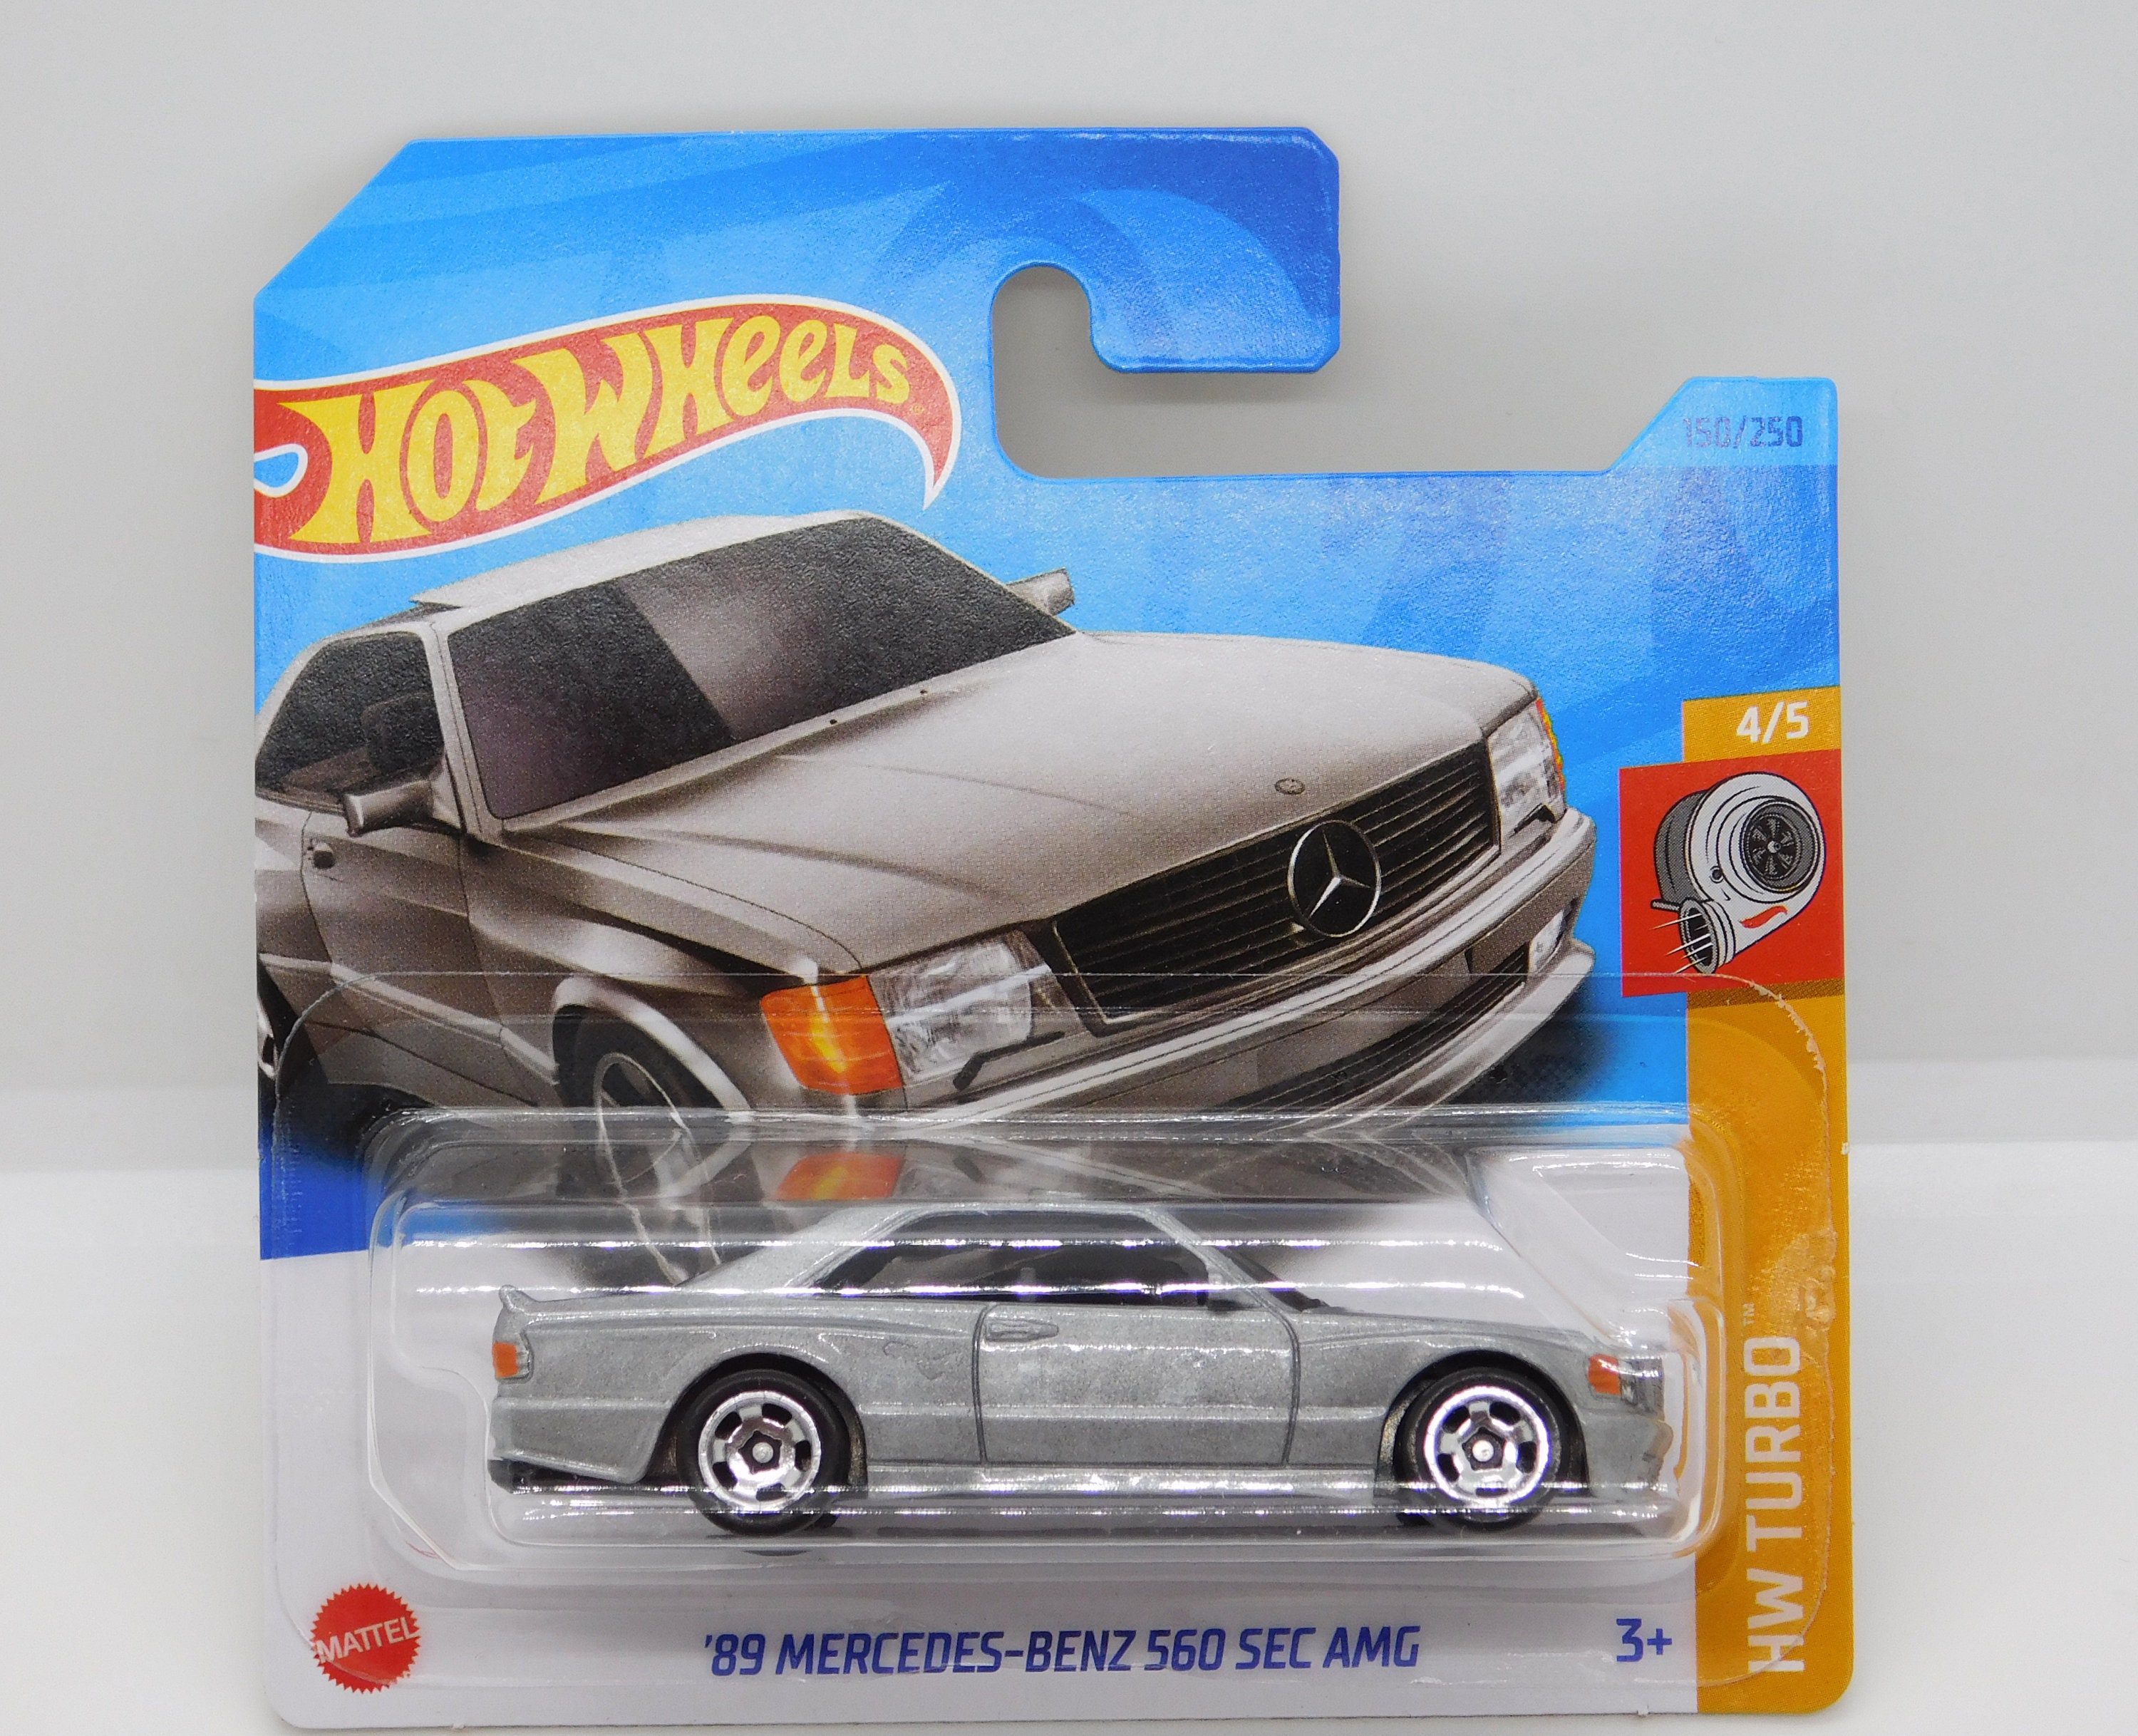 Hot Wheels Mercedes Benz 560 Sec Amg '89 Rare Miniature Collectible Model  ,geschenk ..WORLDWIDE Free Shipping With Tracking Number EVERY DAY - Etsy